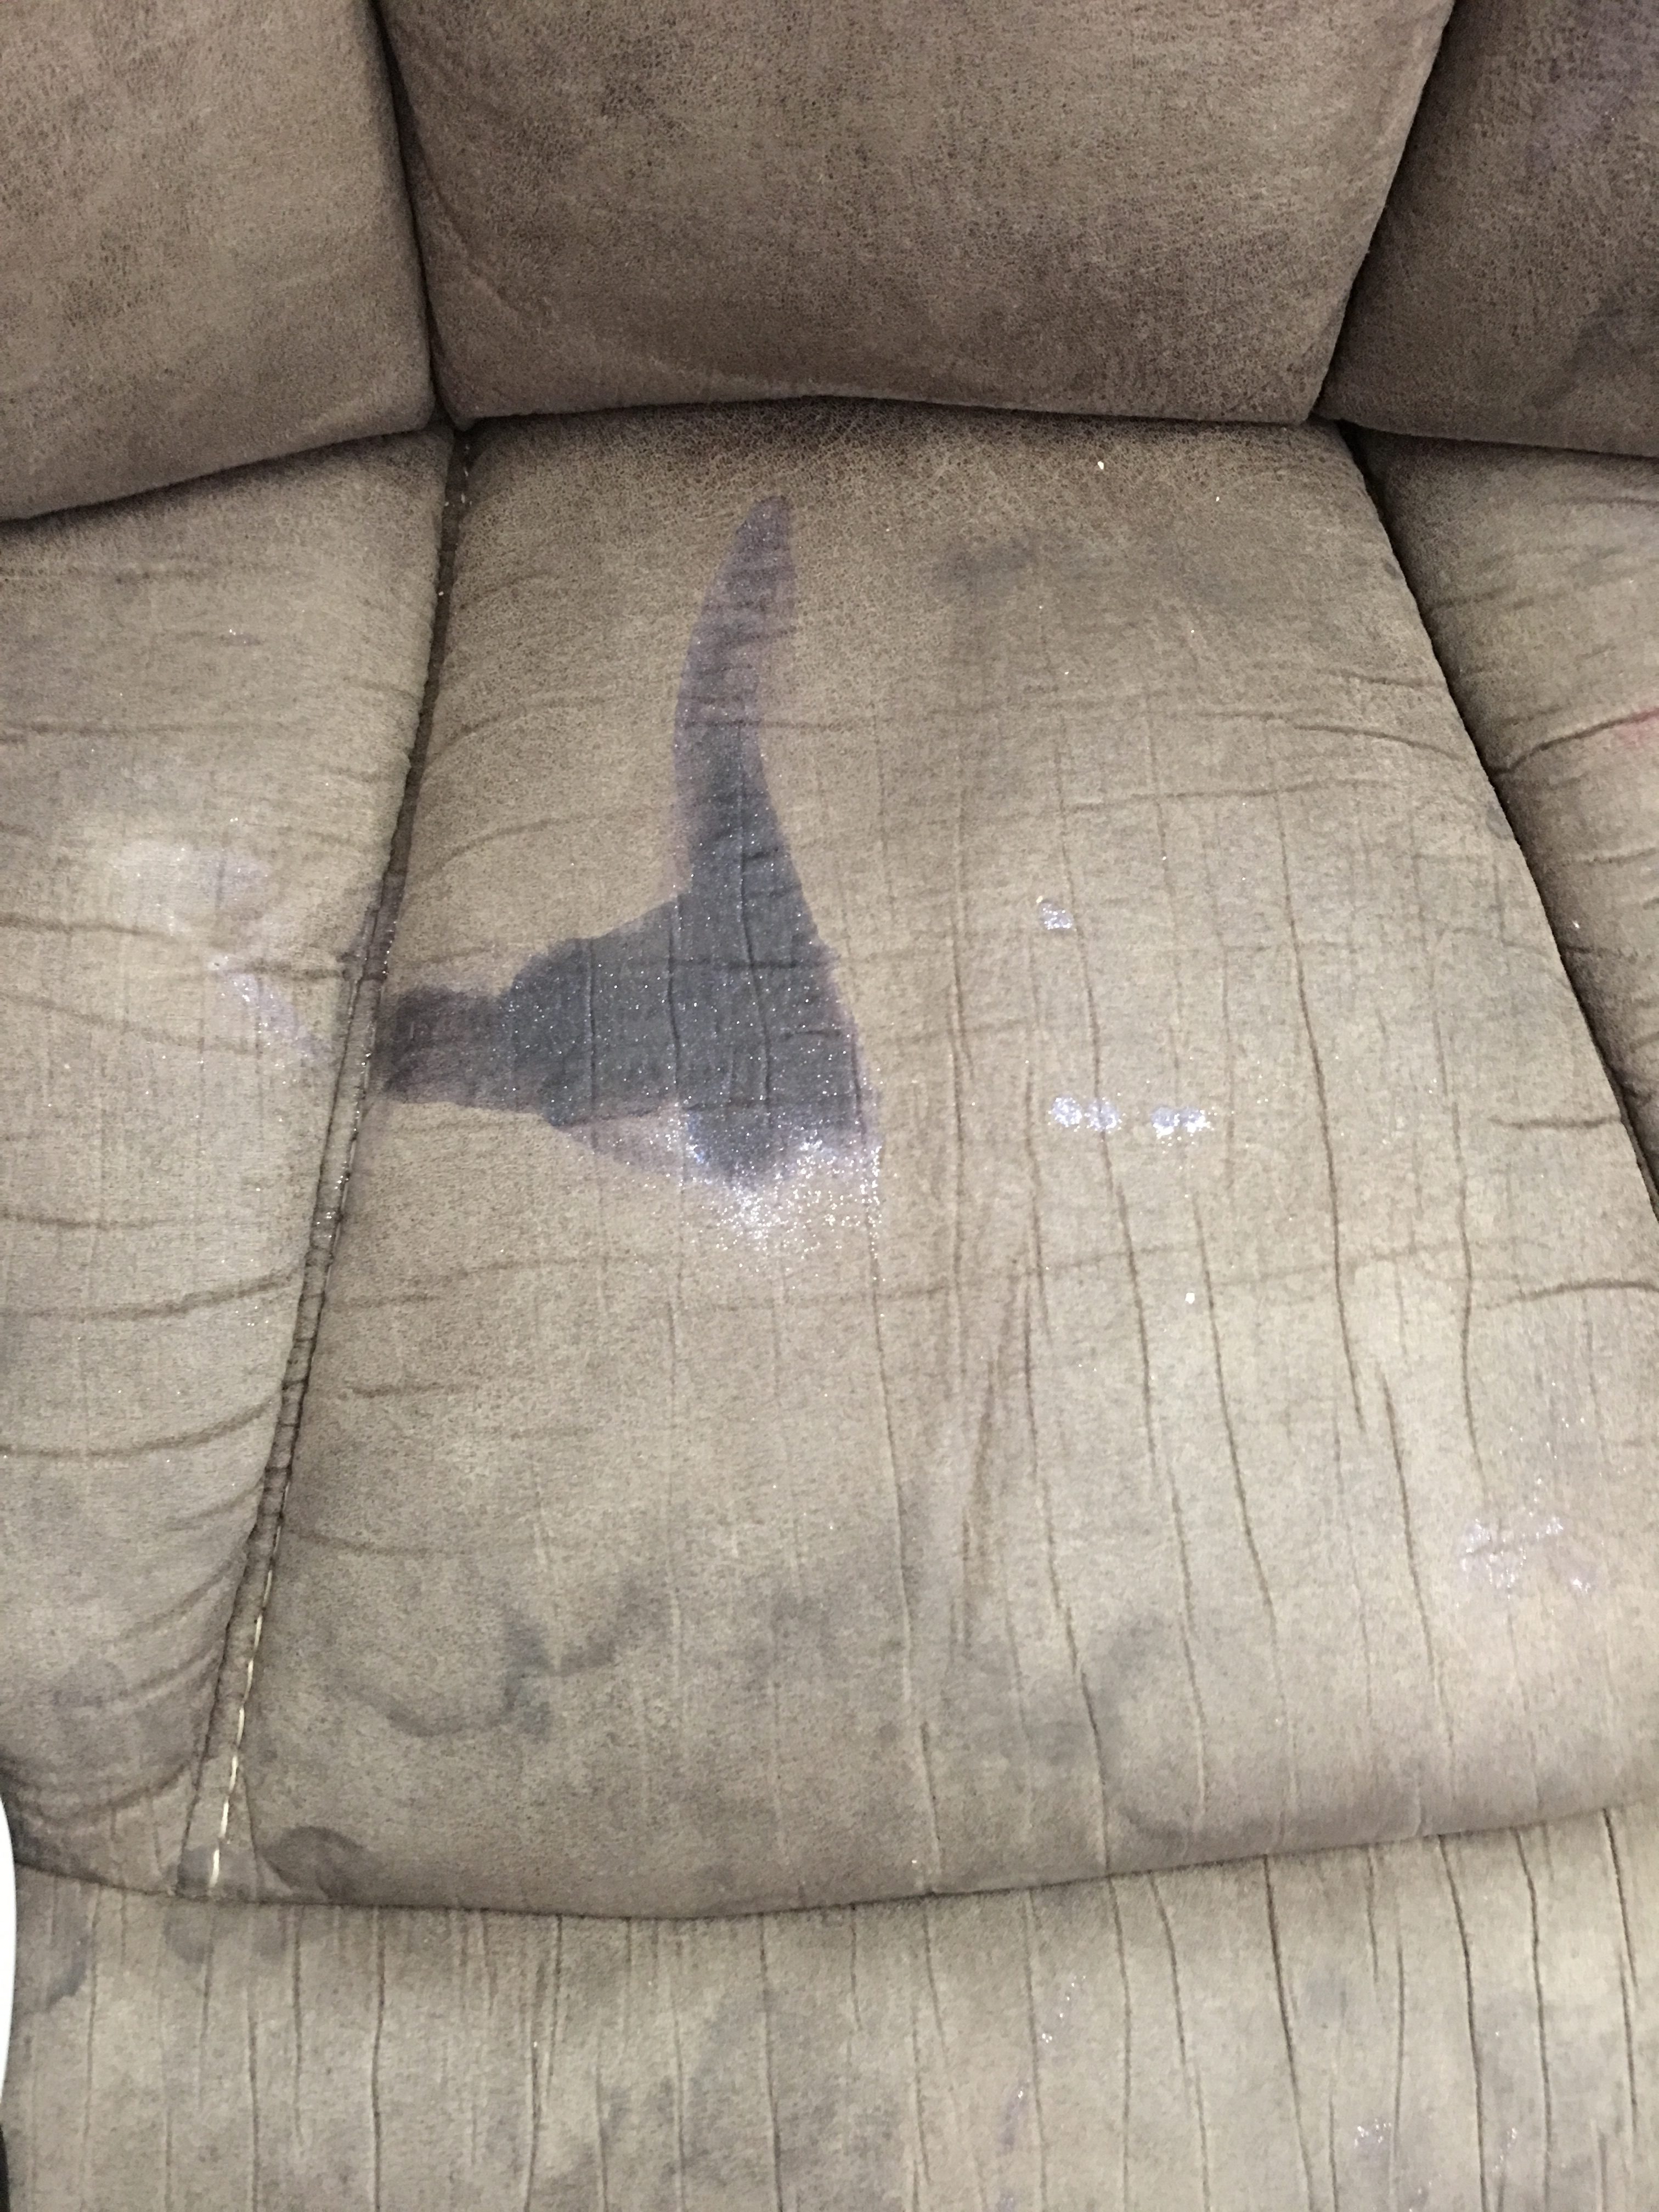 Upholstery Cleaning – Before